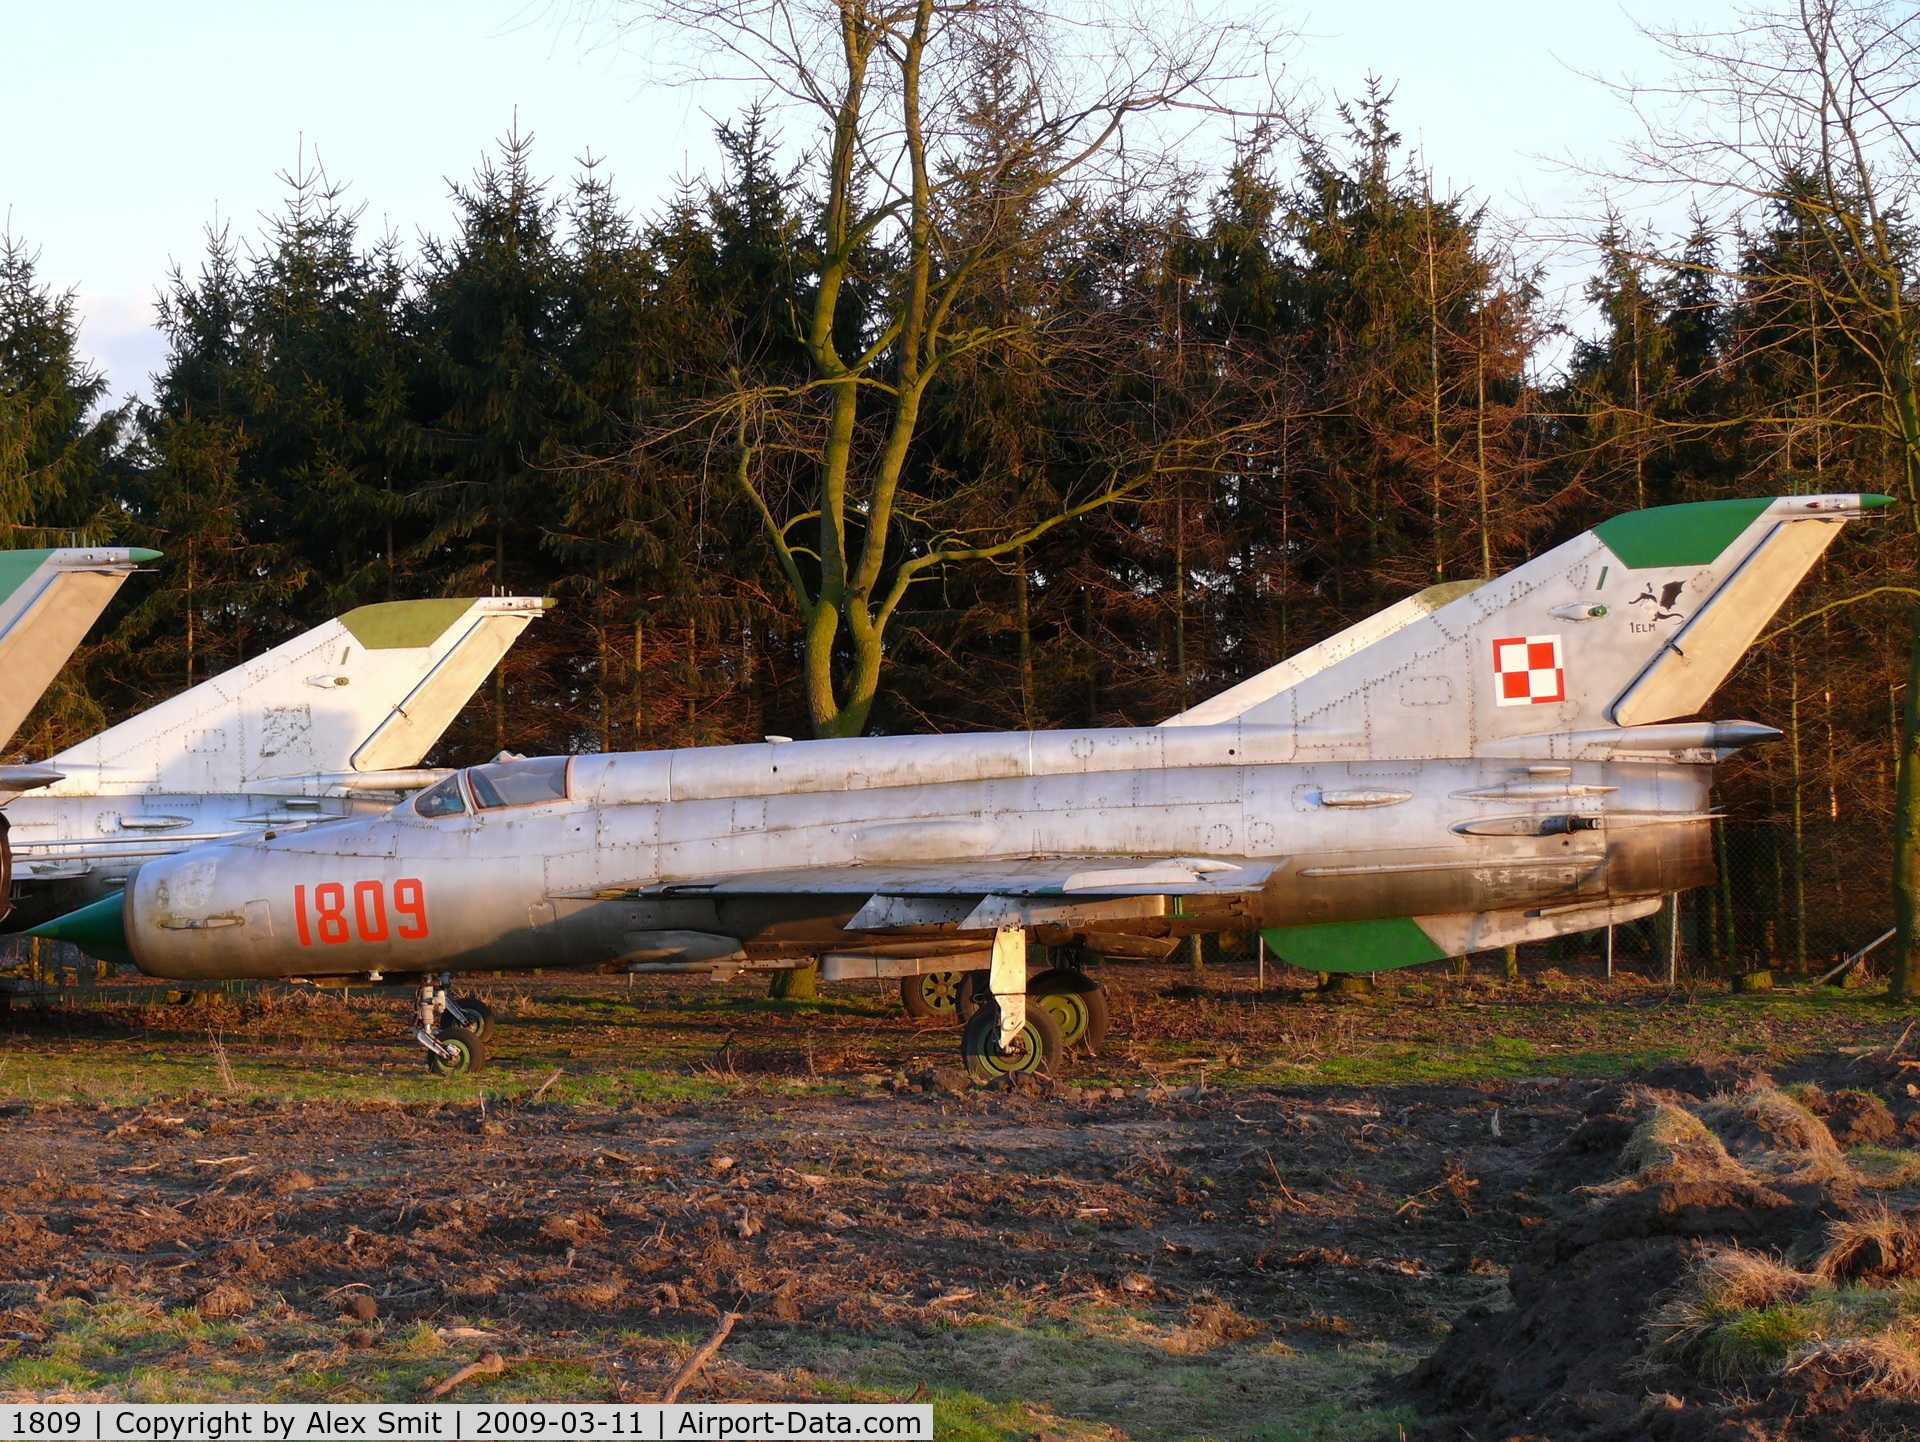 1809, 1996 Mikoyan-Gurevich MiG-21M C/N 961809, Mikoyan Mig21M Fishbed 1809 Polish Air Force part of the collection of Mr Piet Smets from Baarlo (PH) and stored in a small compound in Kessel (PH)